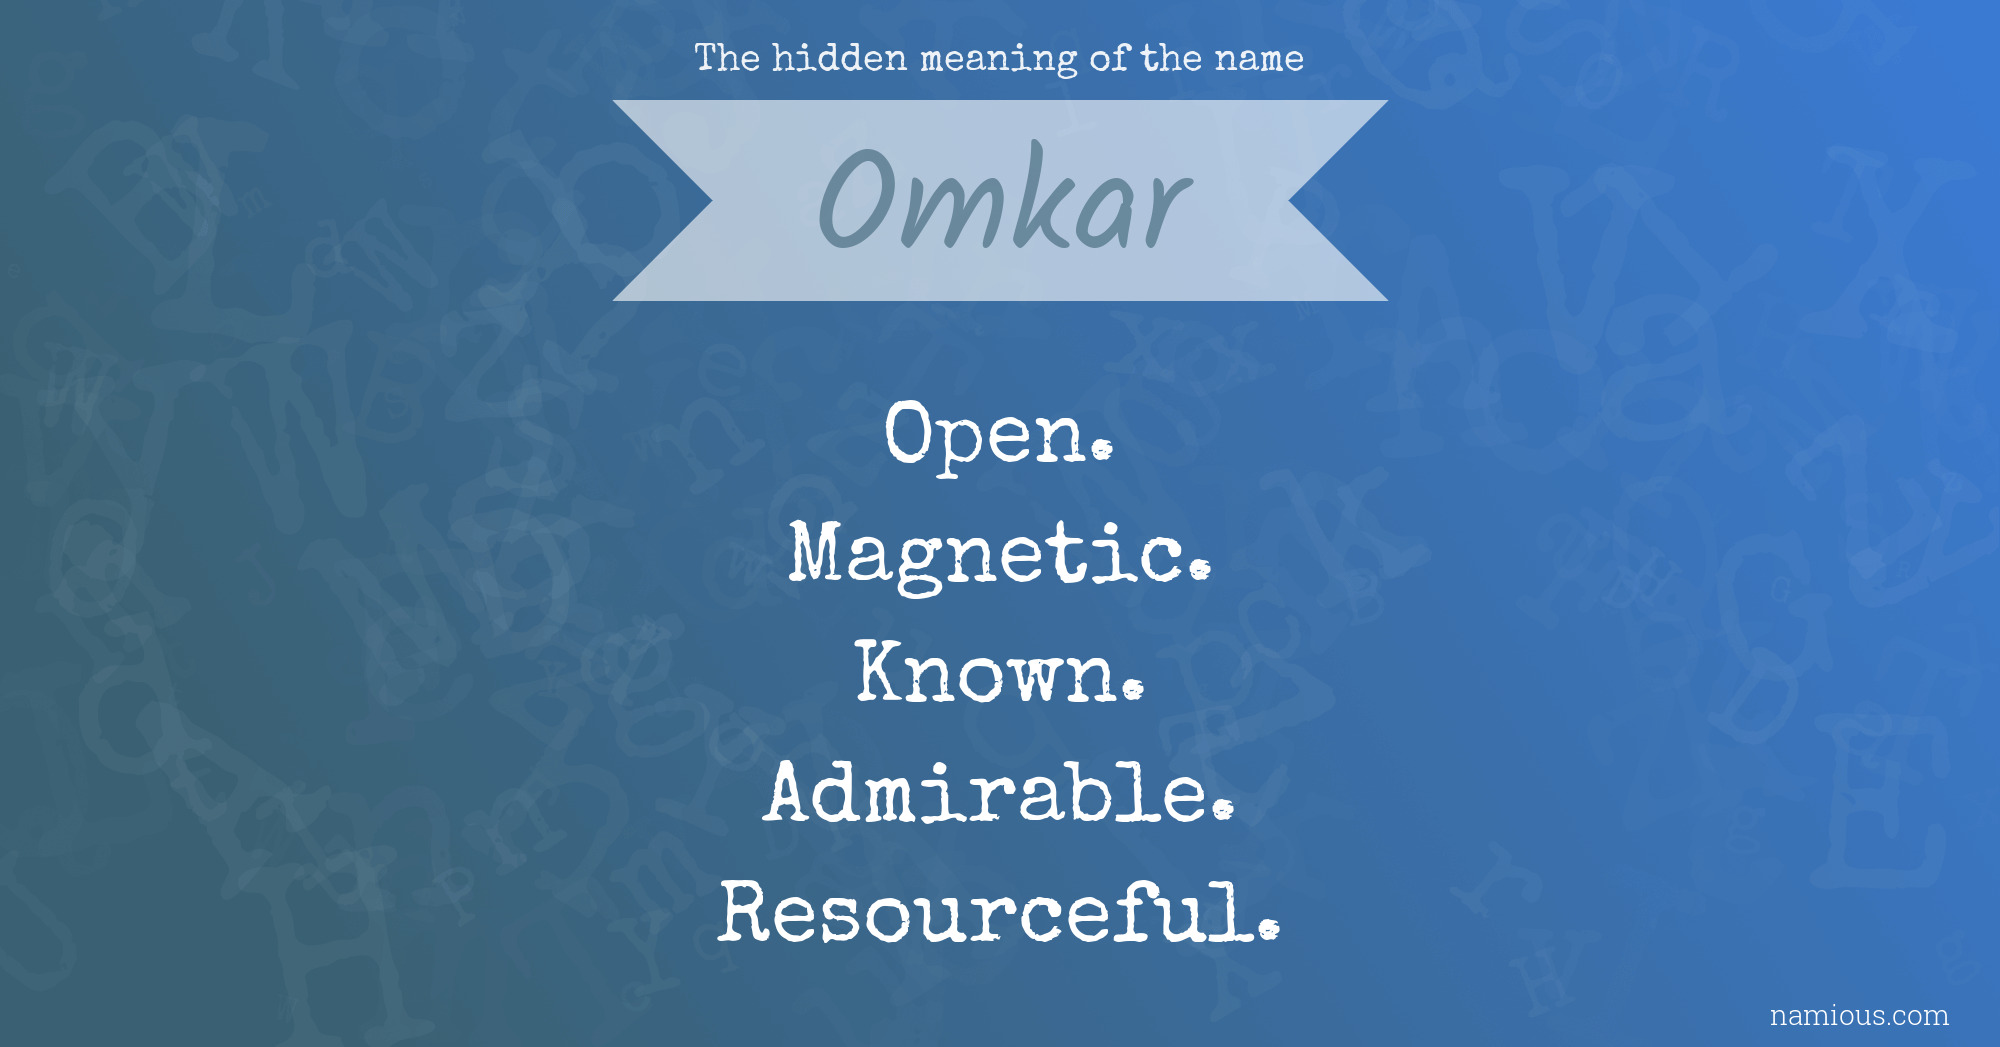 The hidden meaning of the name Omkar